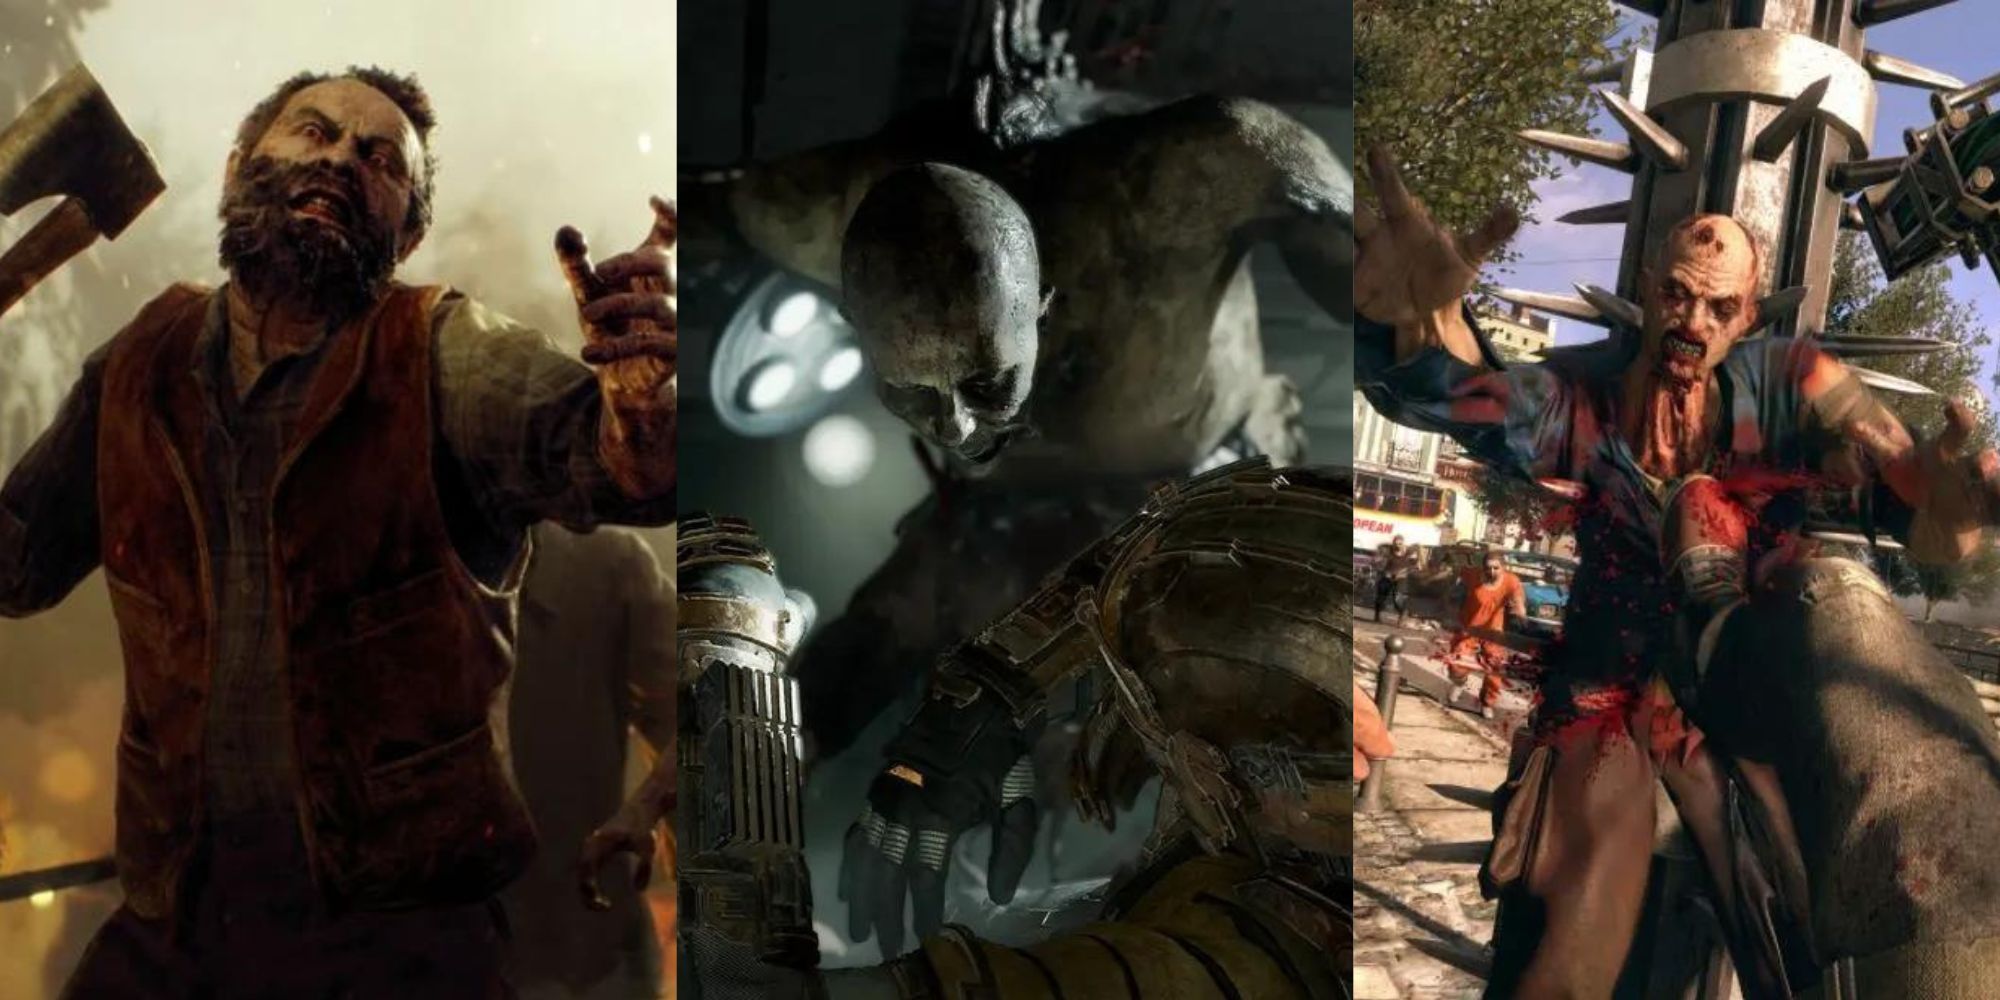 Most Dangerous Types of Video Game Zombies, Ranked featuring the Ganados from RE4, the Necromorph from Dead Space, and the Holler from Dying Light.